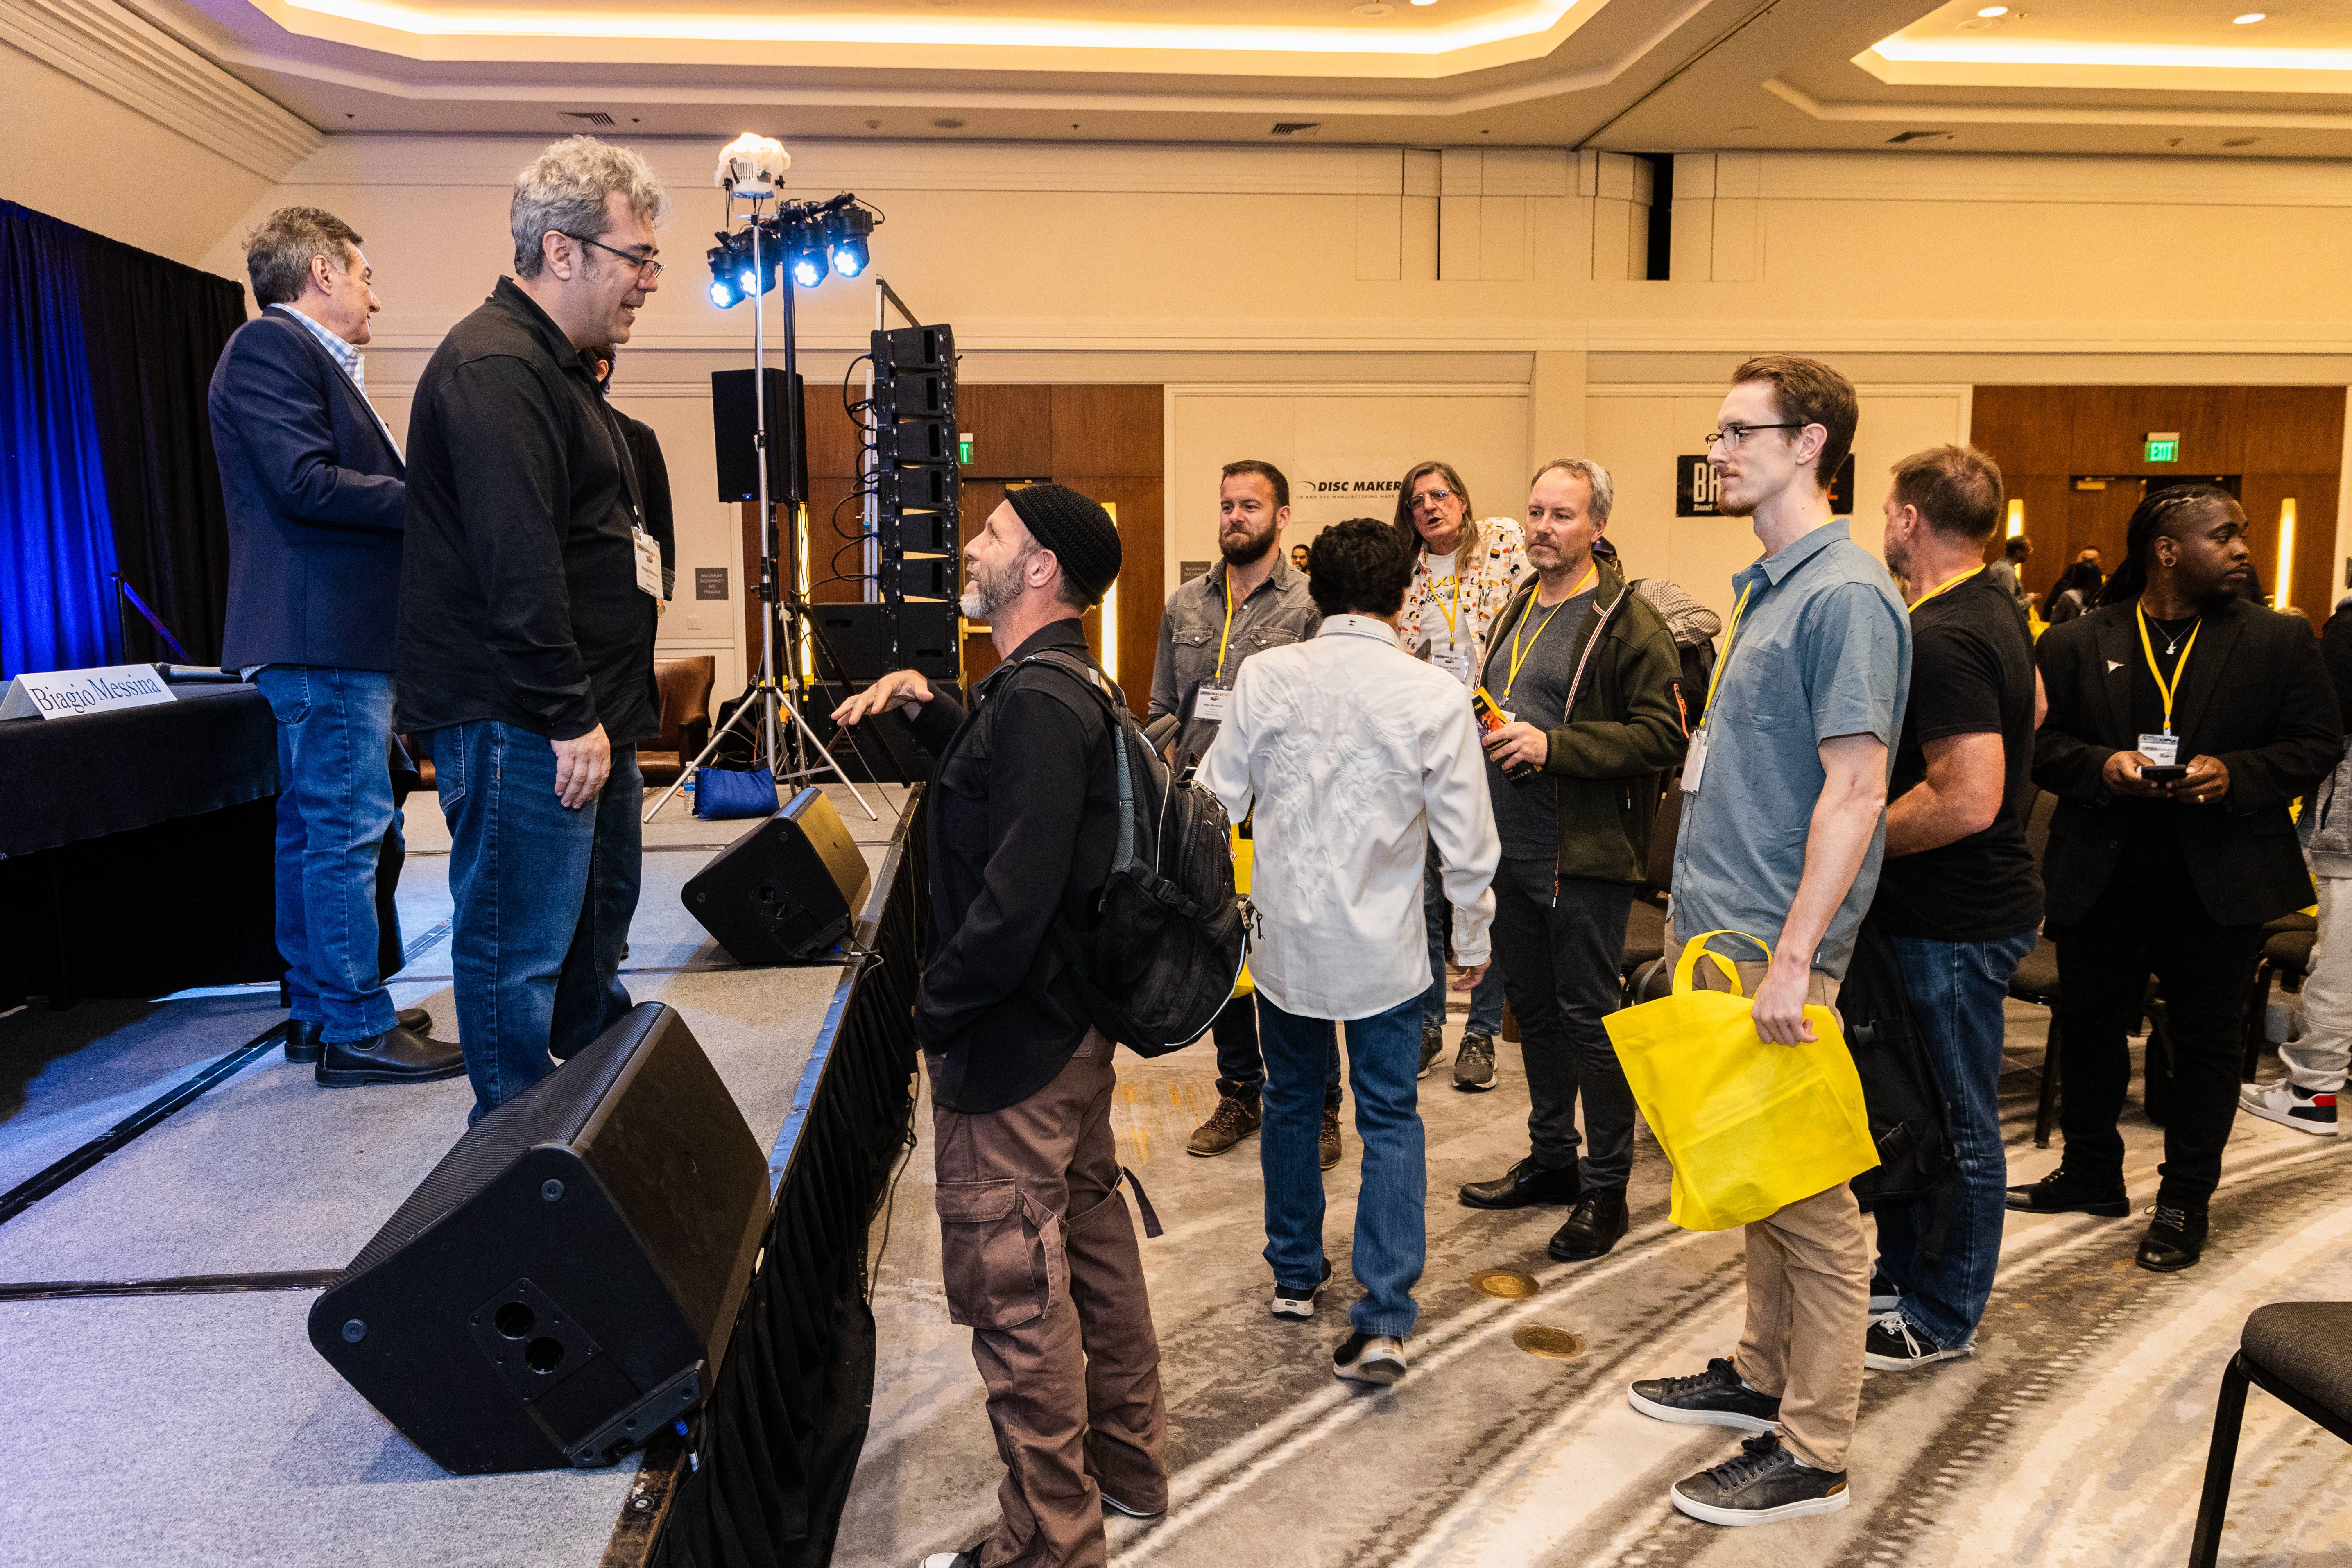 TV Producer, Editor, and Composer, Biagio Messina delivered an incredible presentation showing how music and stems are utilized by TV show producers and editors. The enthusiastic audience members loved it and clearly had plenty follow-up questions when the presentation ended.